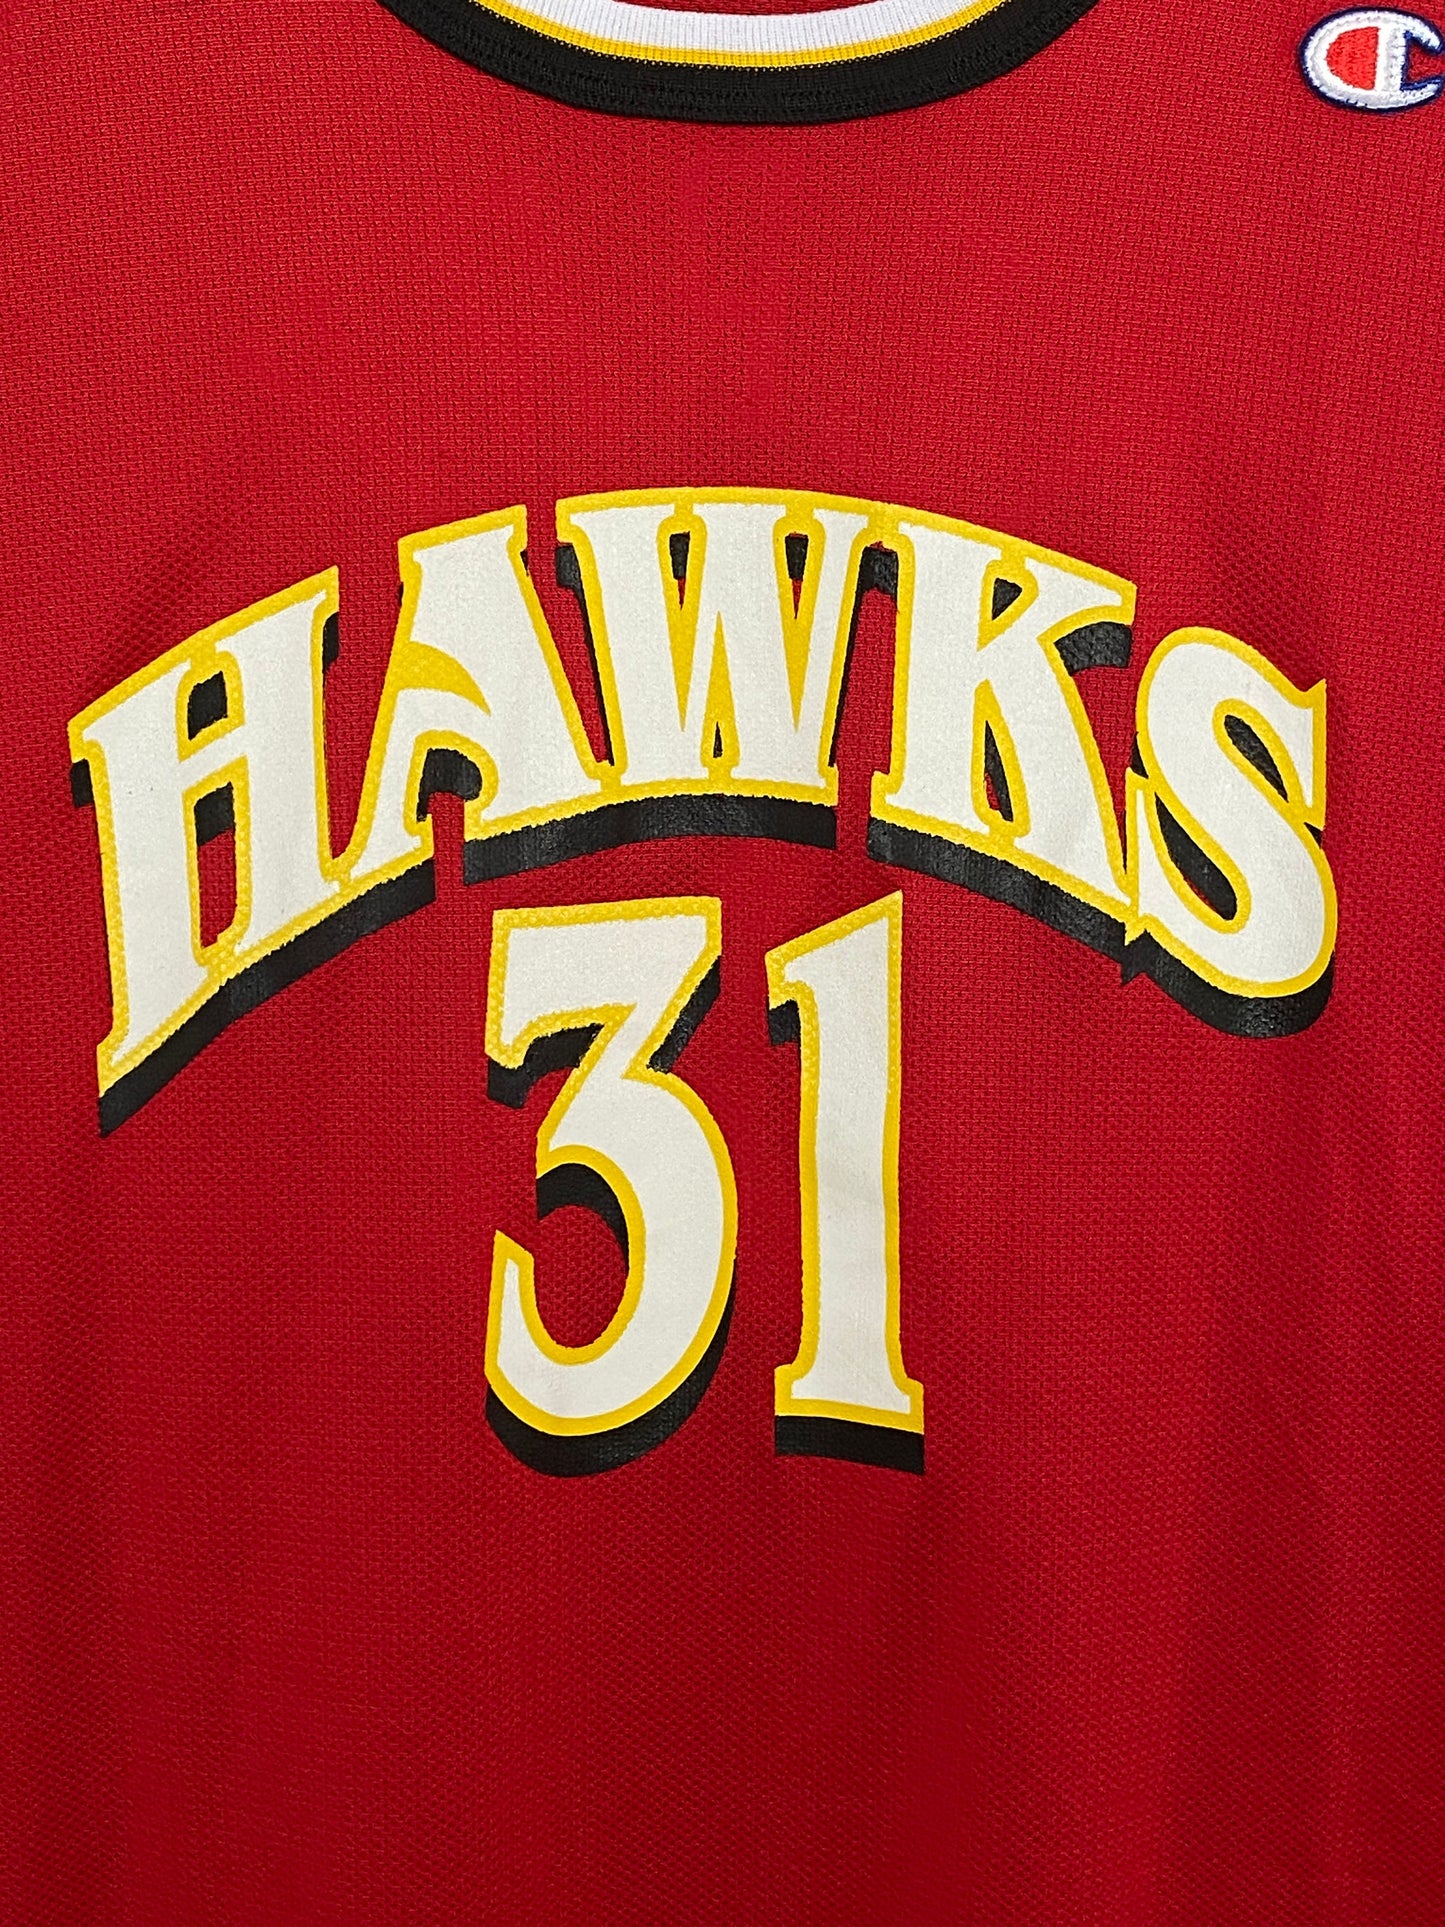 Size 52. Vintage 90s Hawks NBA jersey, Player Terry #31 Made by Champion